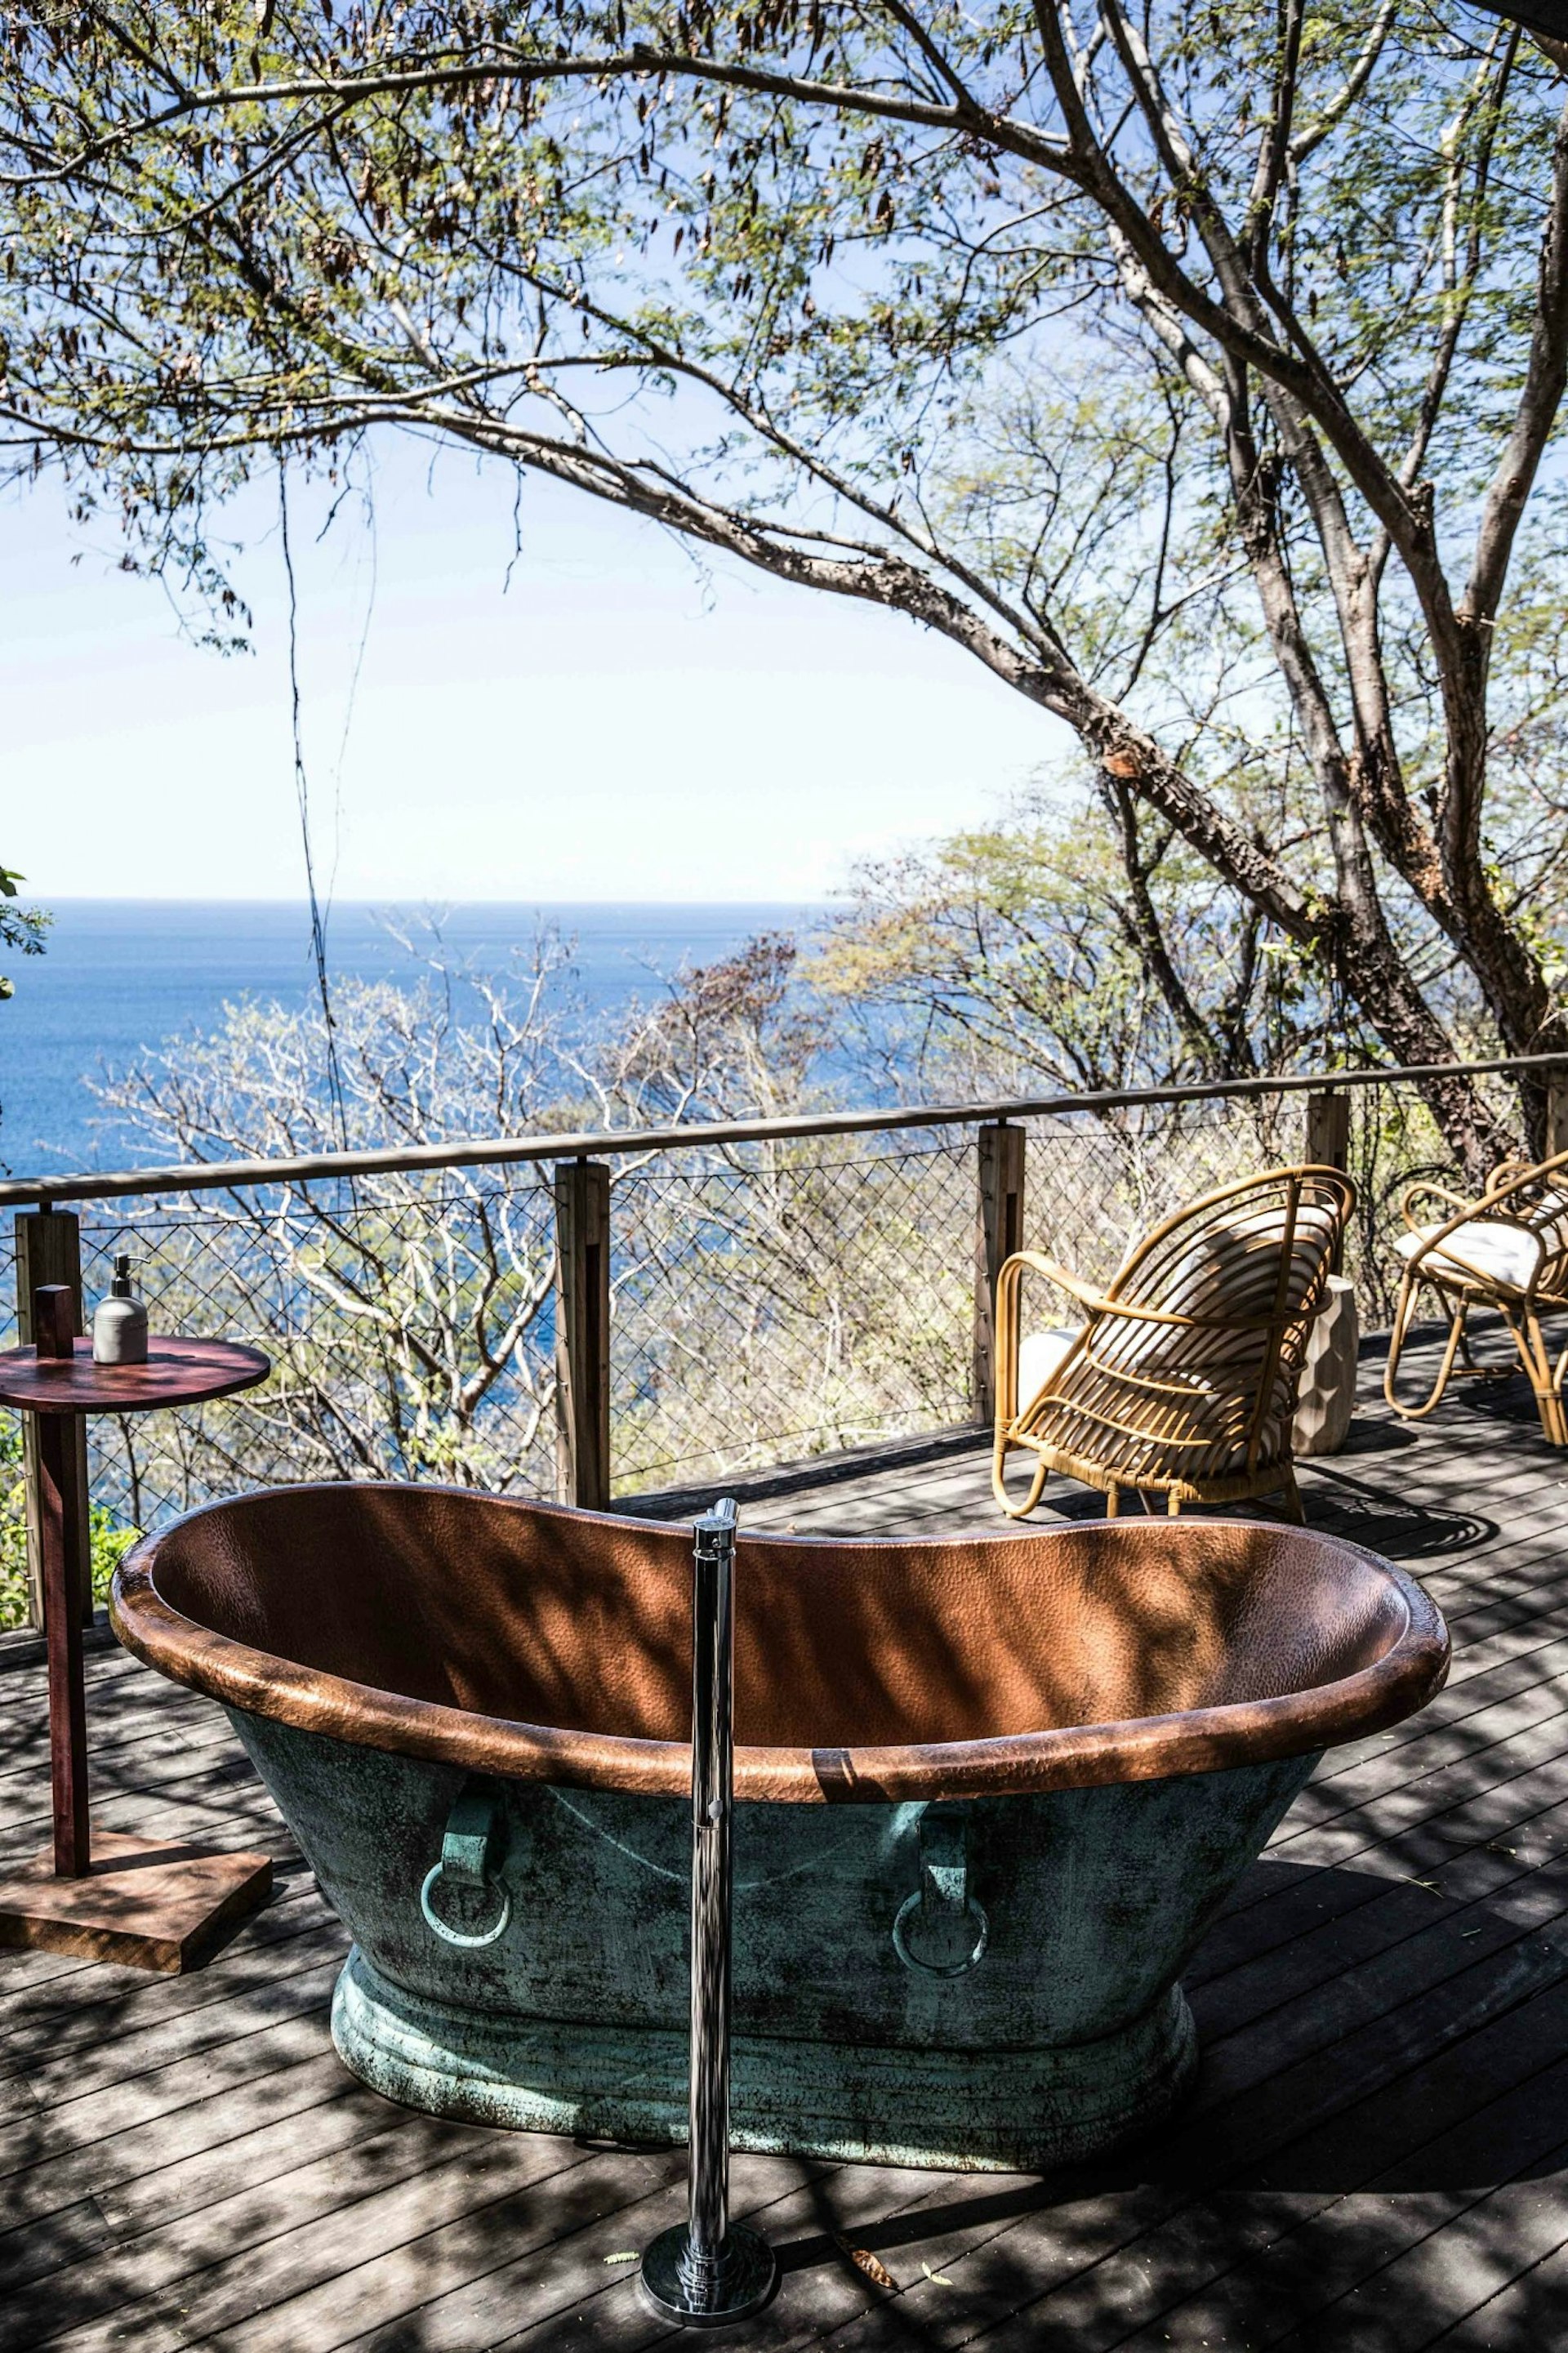 Outdoor brass bathtub in tropical forest